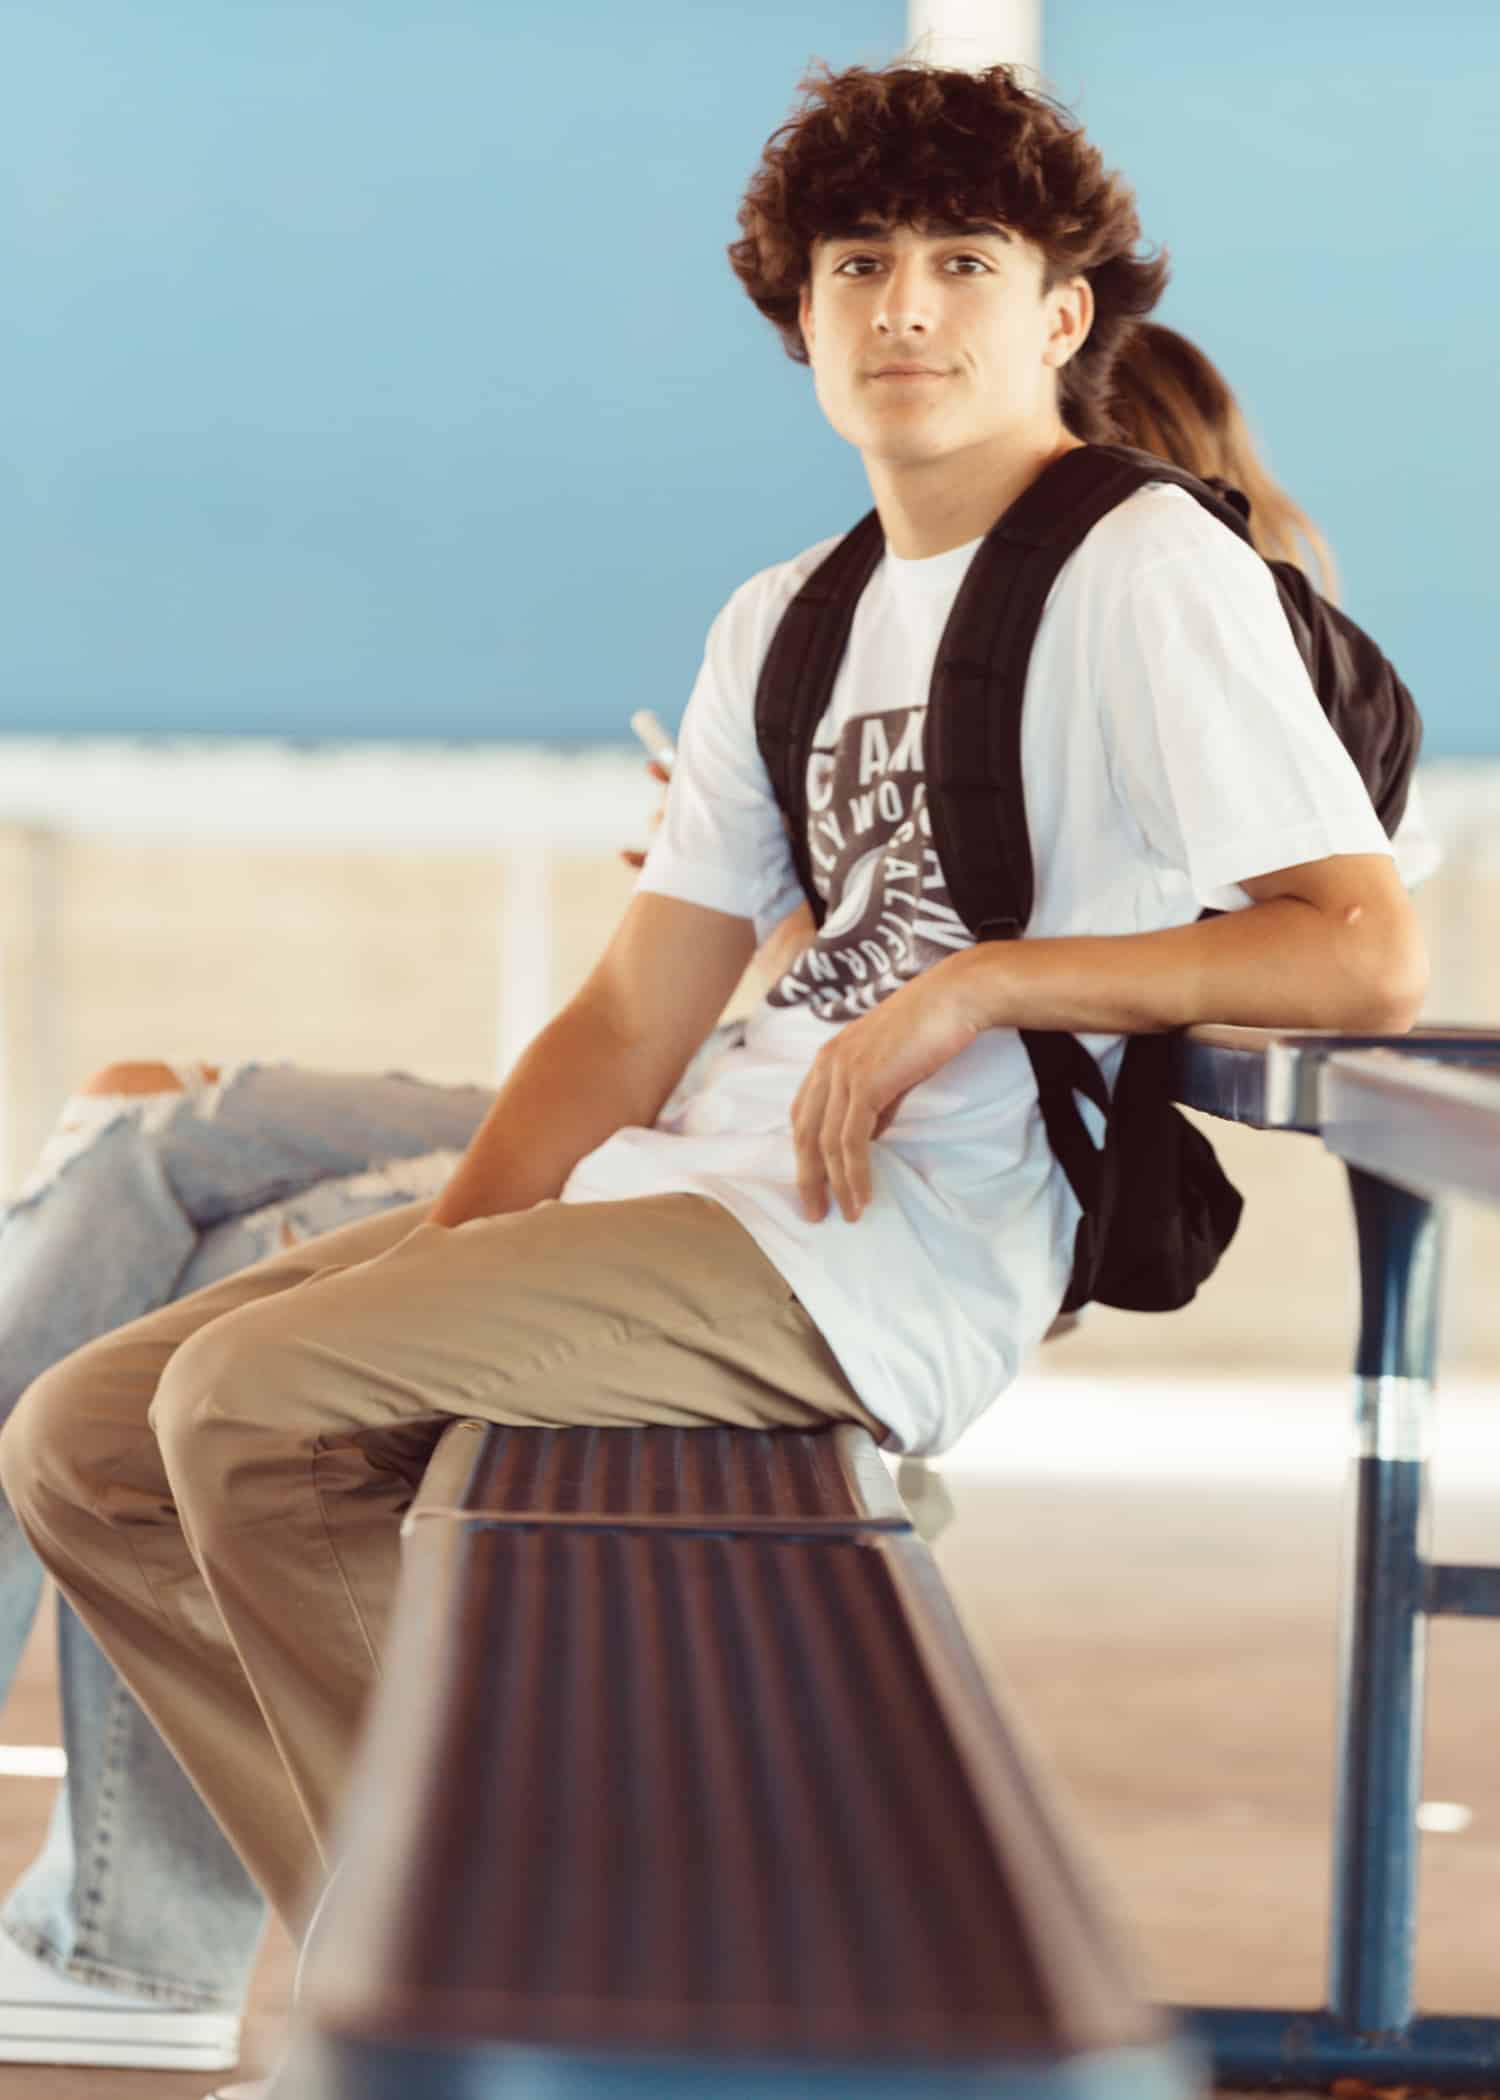 A handsome teenage boy with dark hear wearing a backpack. He is sitting on a bench. A good example of a casting profile image for a teenage actor.